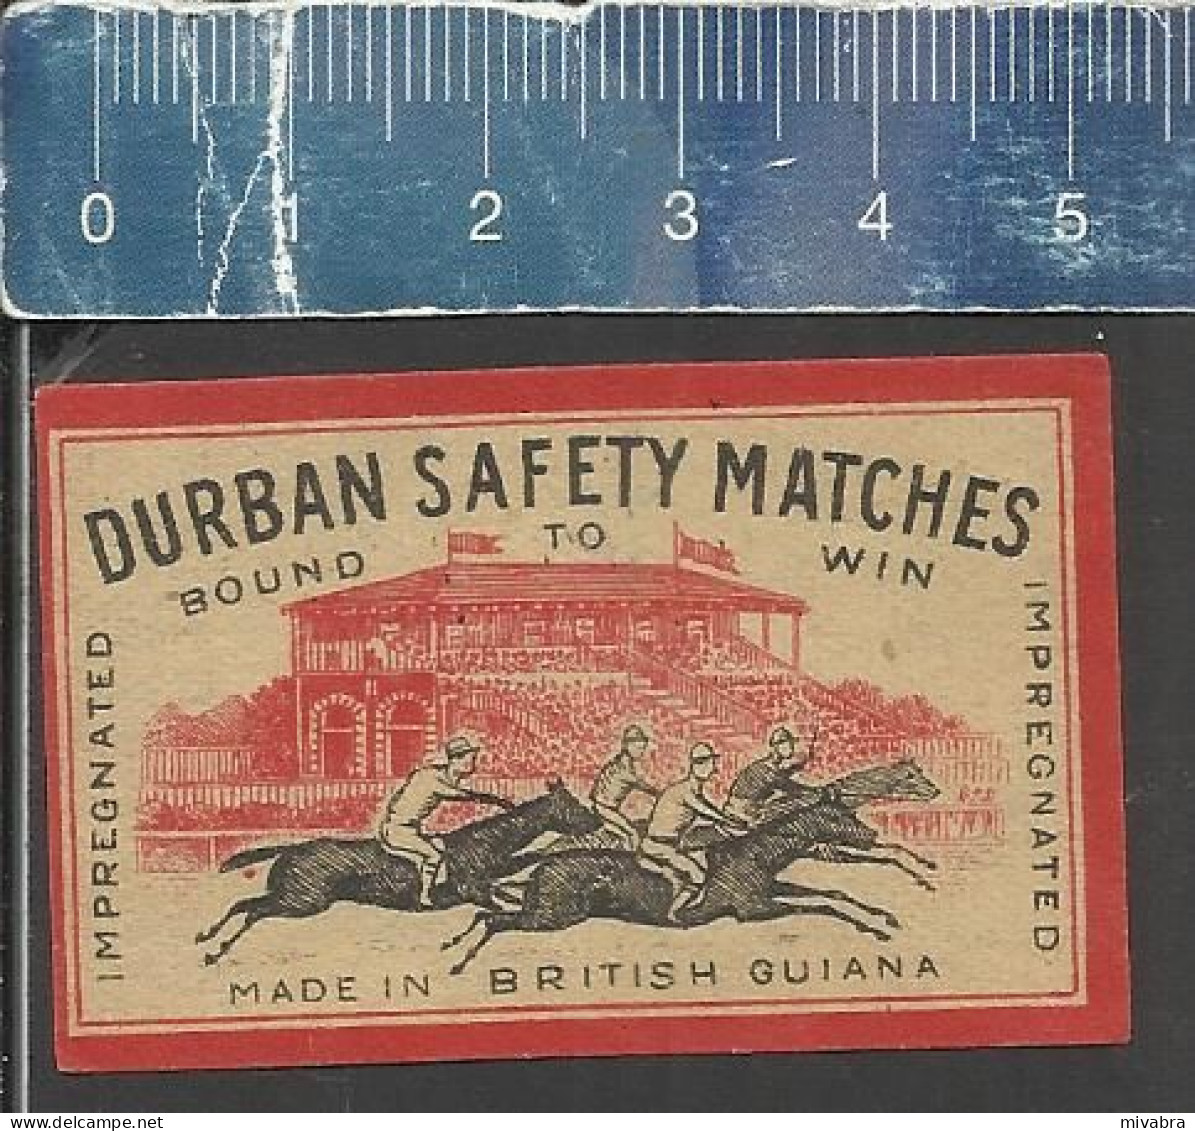 DURBAN SAFETY MATCHES BOUND TO WIN HYPODROOM HORSE RACE- OLD VINTAGEMATCHBOX LABEL MADE IN BRITISH GUIANA - Matchbox Labels